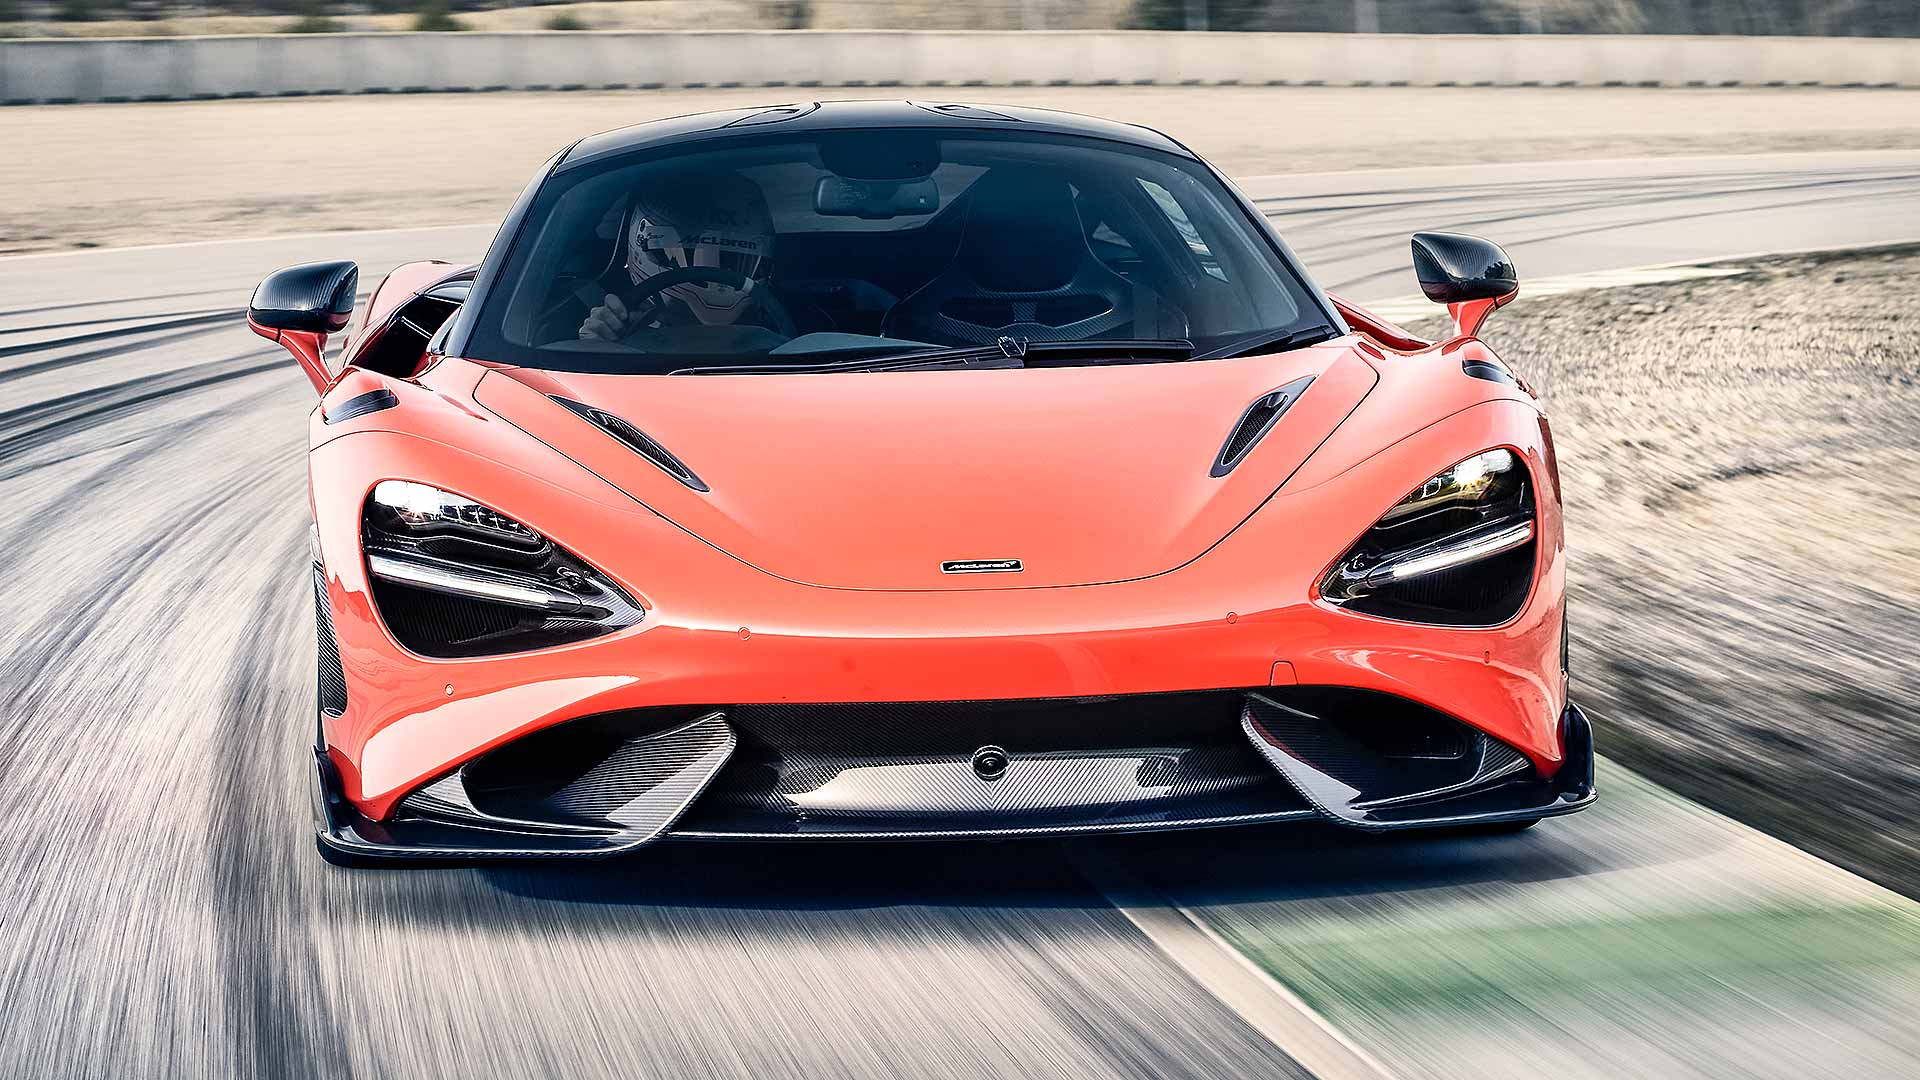 Hardcore McLaren 765LT is the most powerful 'Longtail' yet